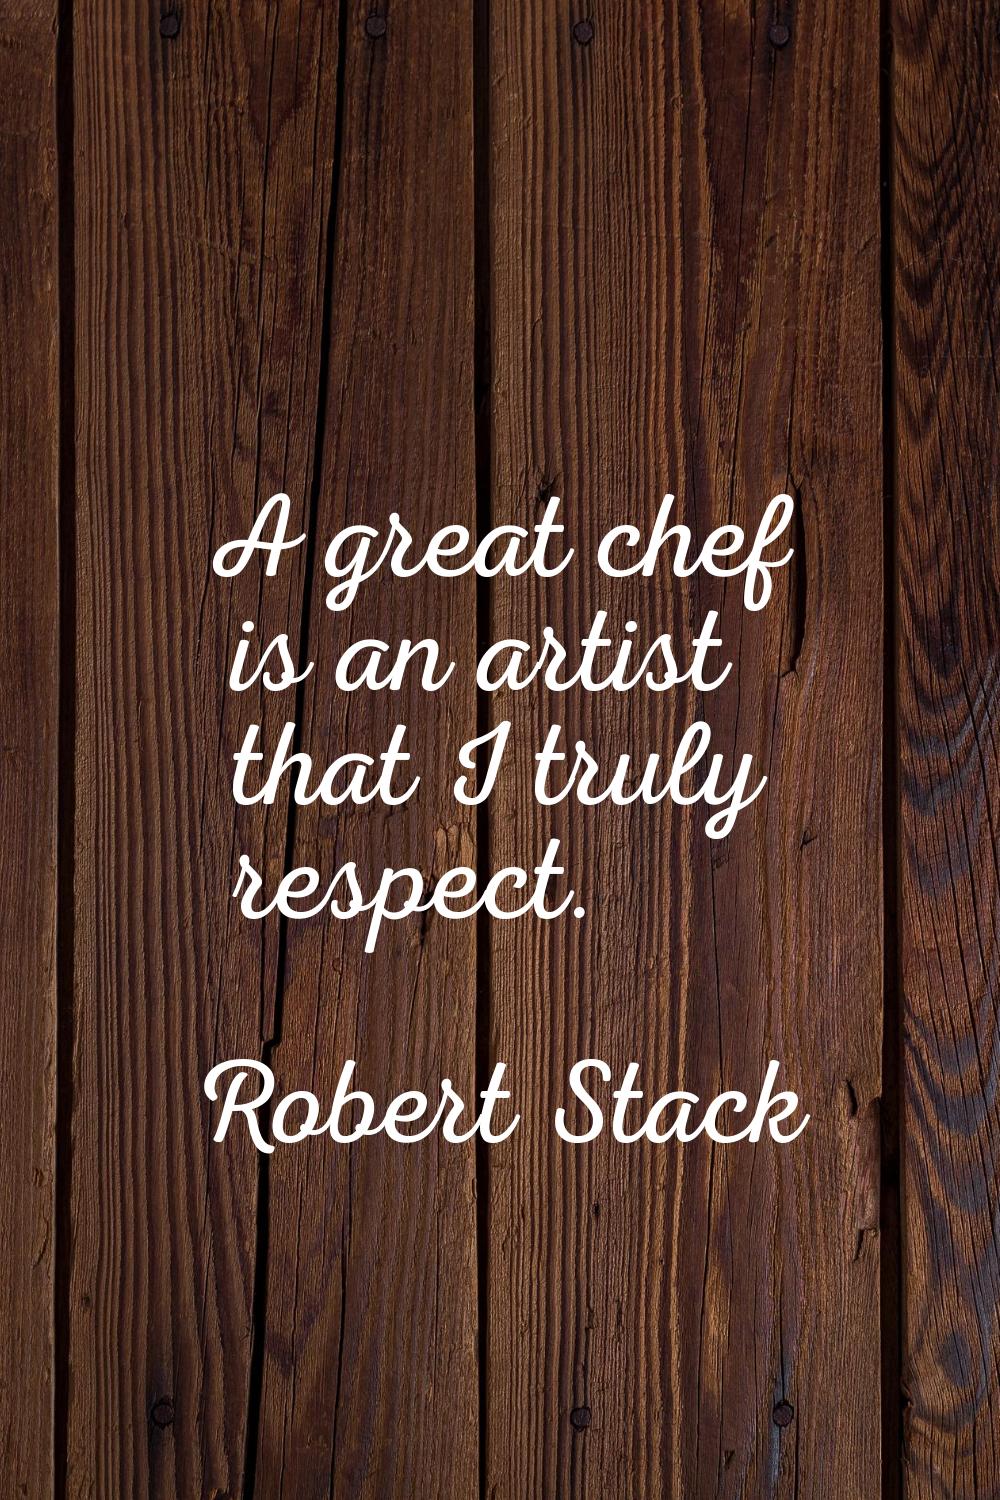 A great chef is an artist that I truly respect.